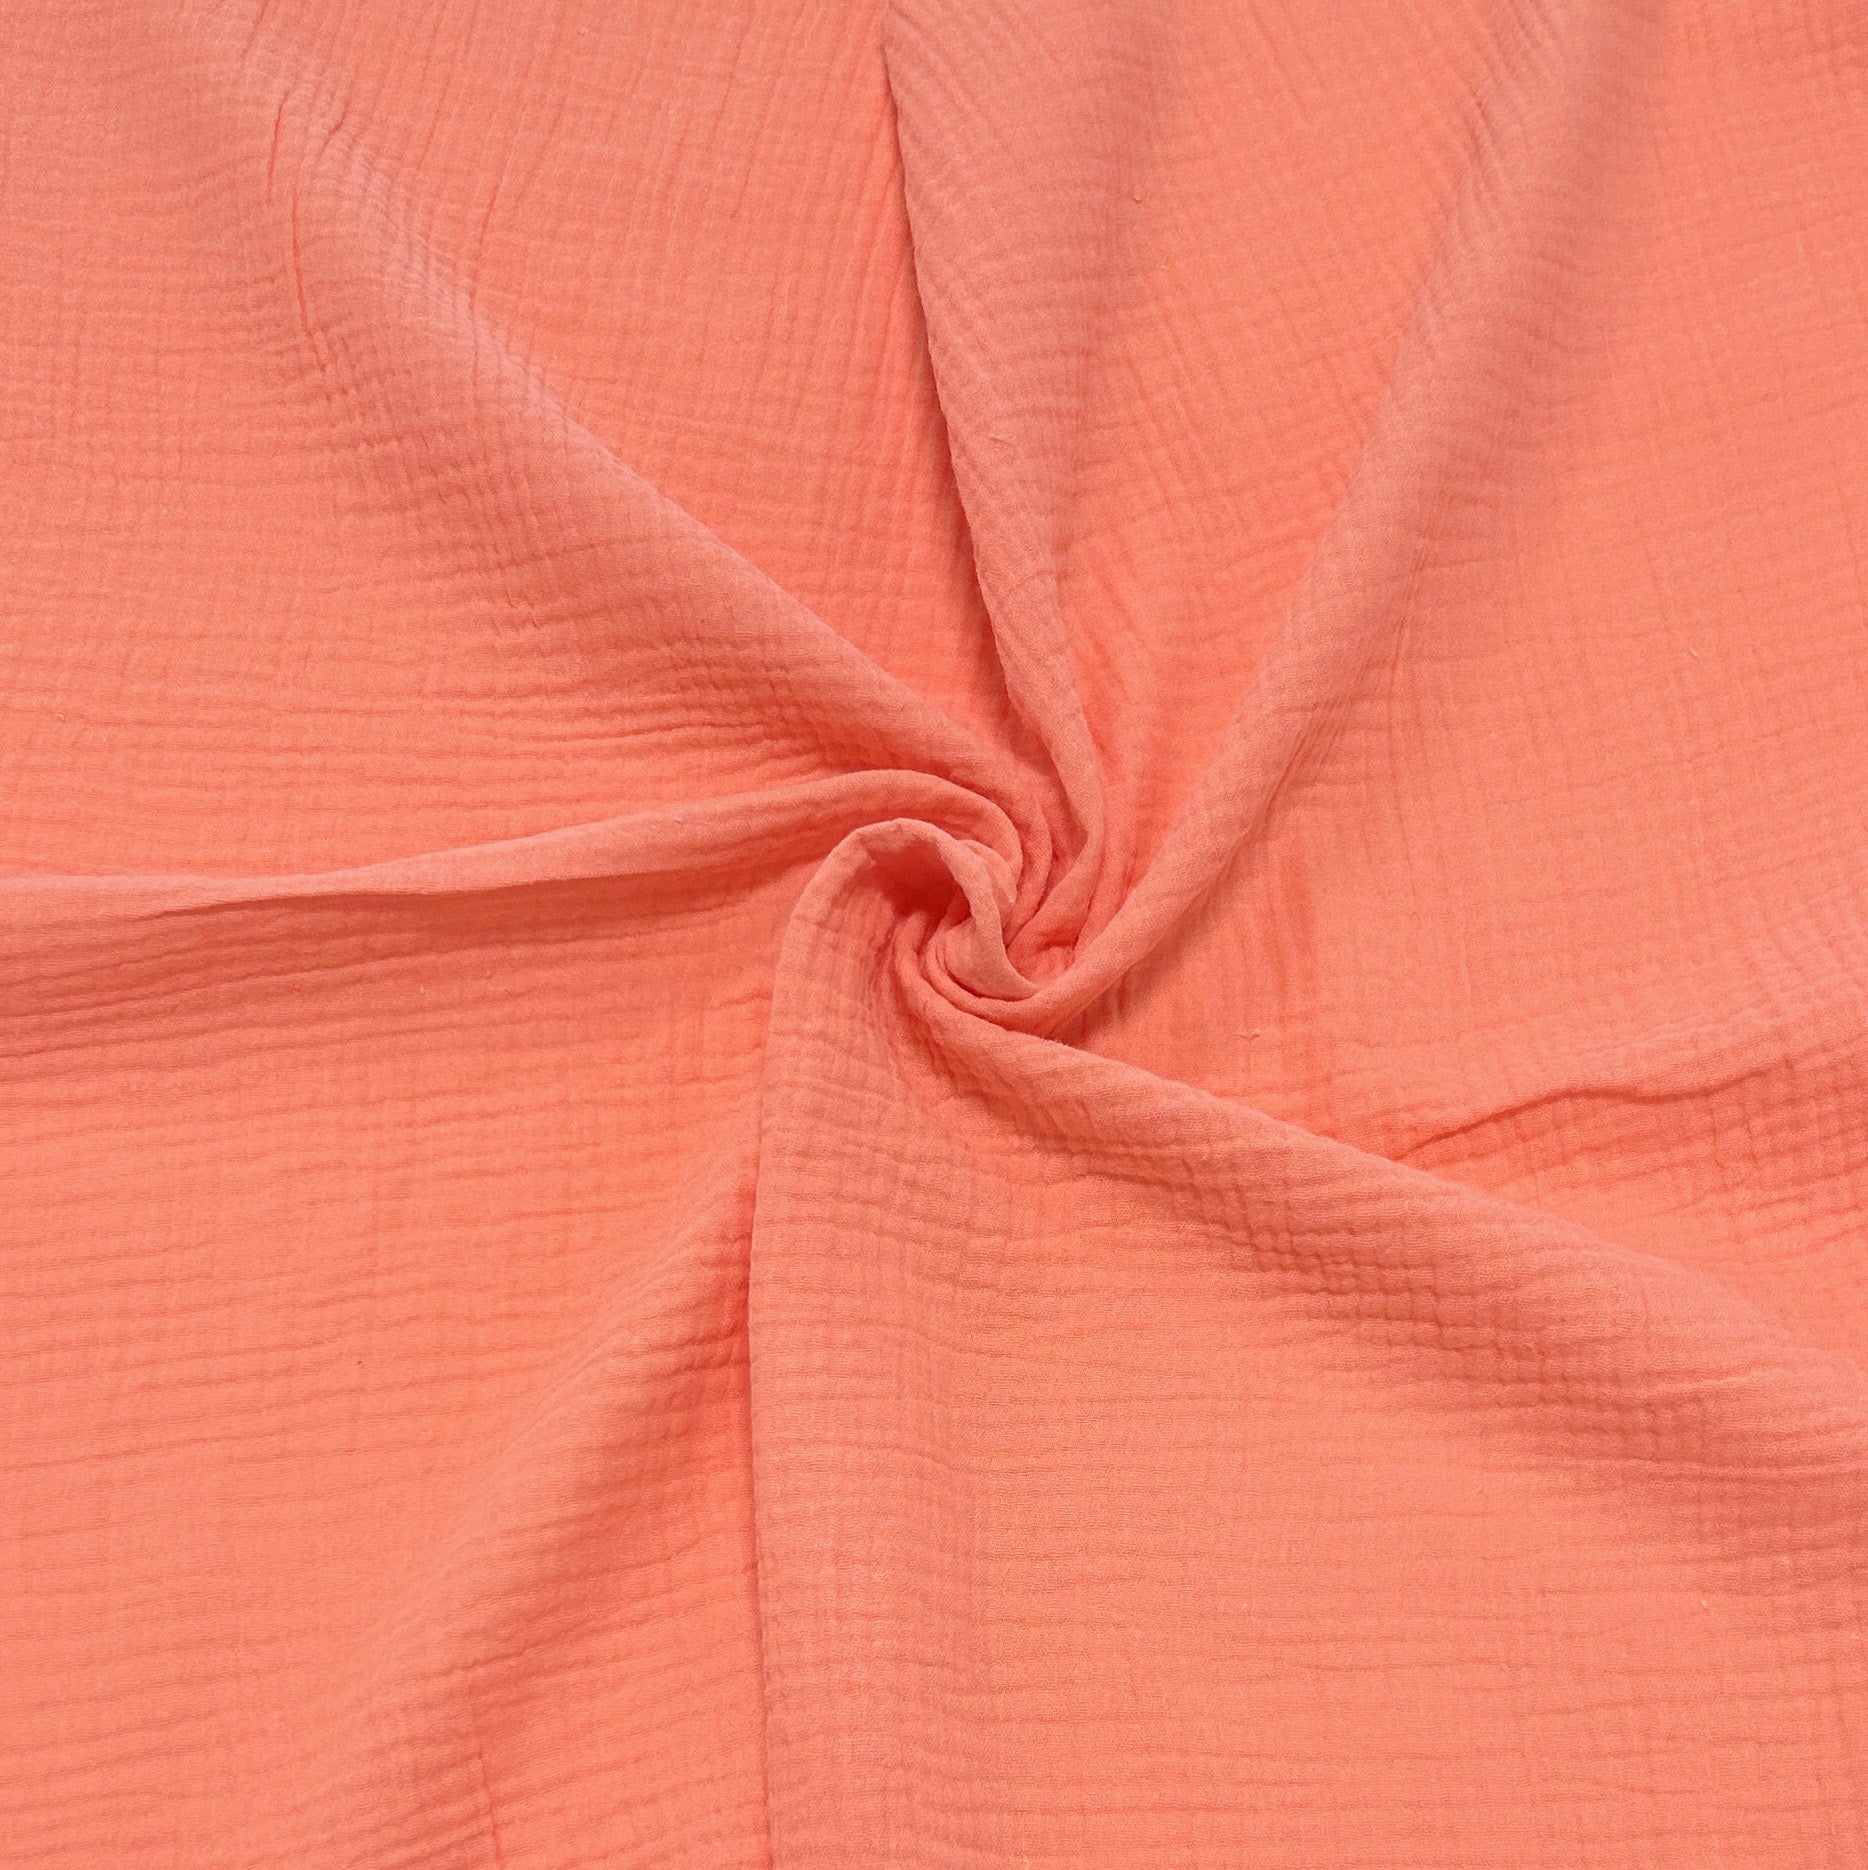 Coral Woven Cotton Light Weight Double Gauze Fabric